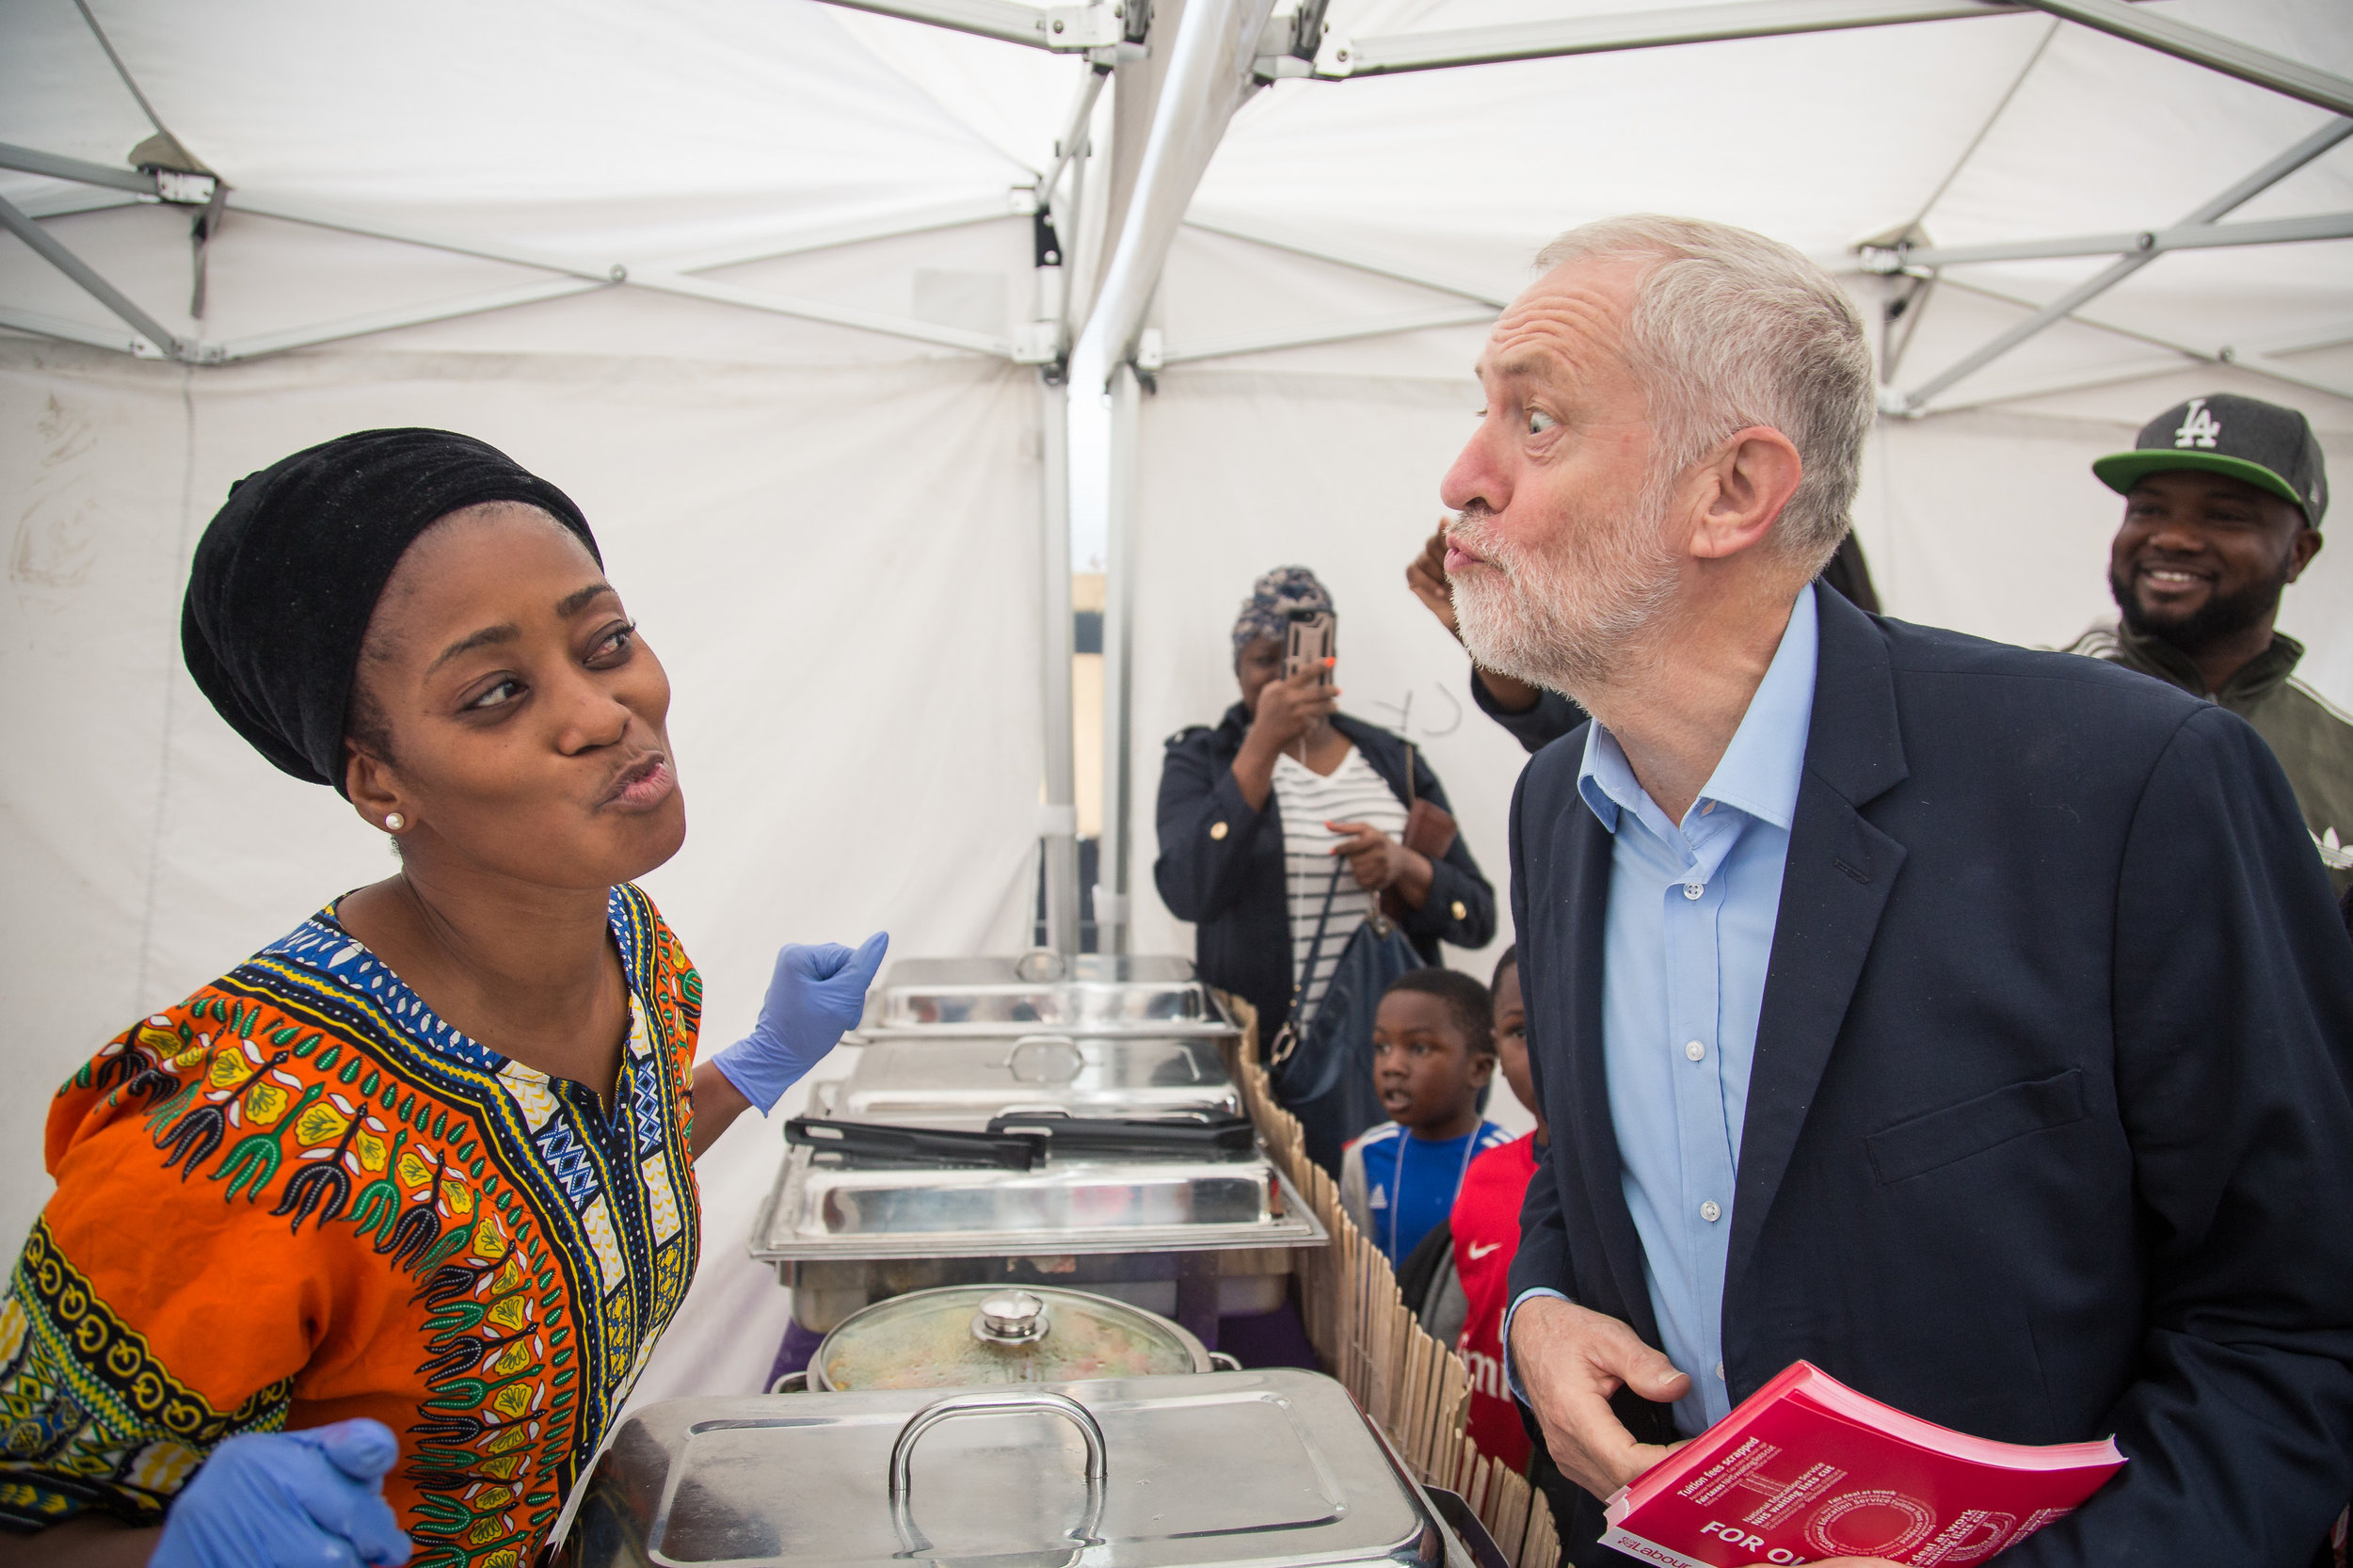  Jeremy Corbyn MP, leader of the Labour Party, greets a  local market trader in Grays Essex whilst meeting members of the public on a walkabout with the party faithful.
Photo by Manu Palomeque, 30 September 2017
 